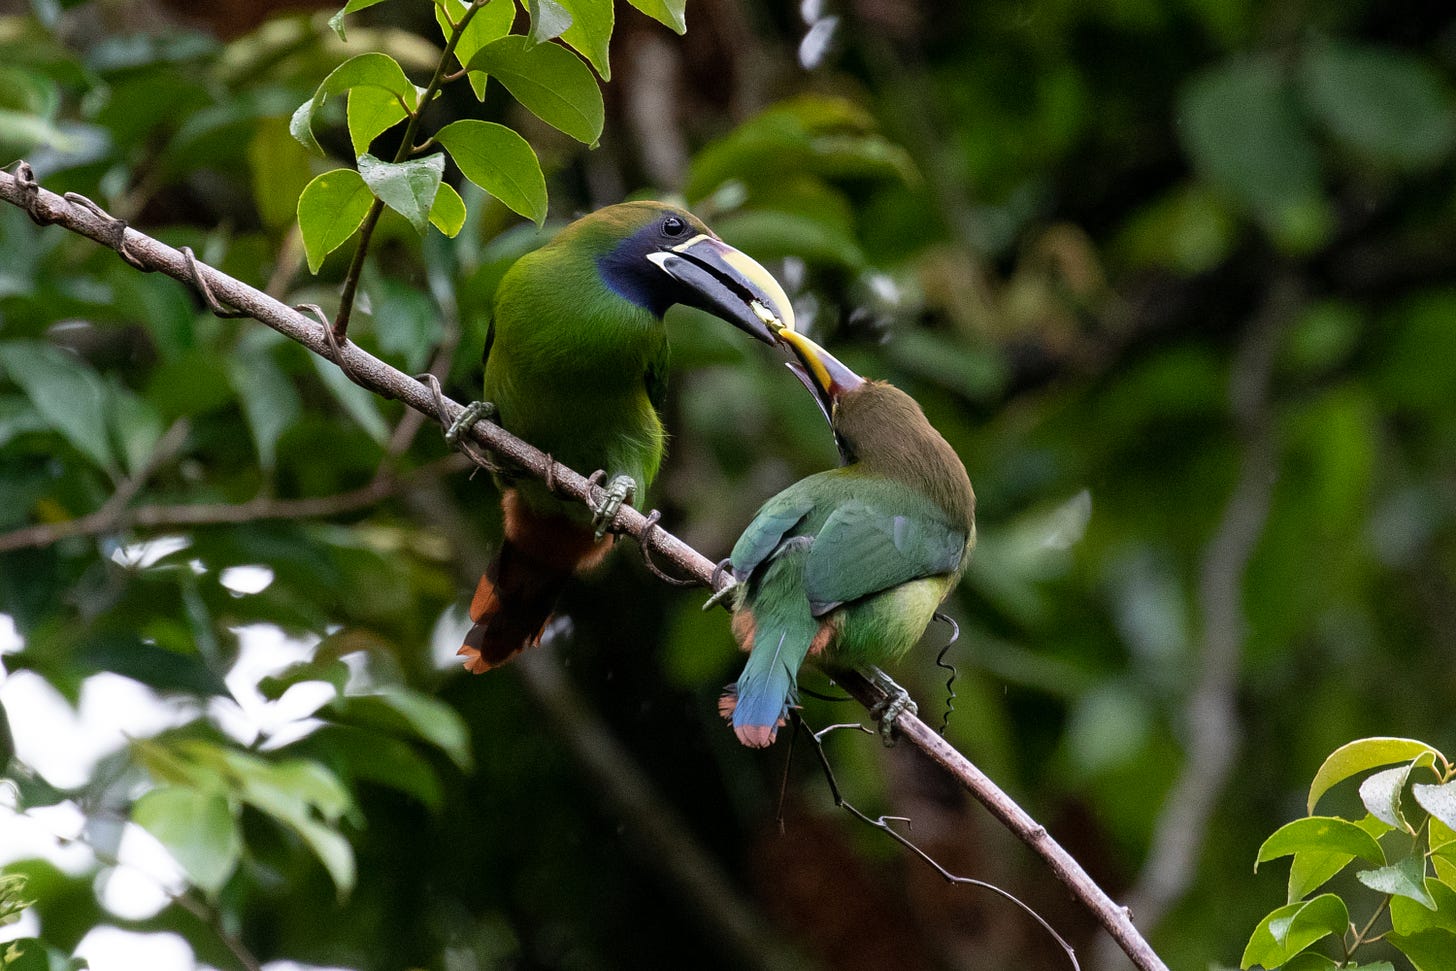 two emerald toucanets - green mini toucans with half black, half yellow beaks and blue faces and rusty rumps, perched on a leafy branch. the bird on the left is feeding a shiny gold beetle into the mouth of the bird on the right.